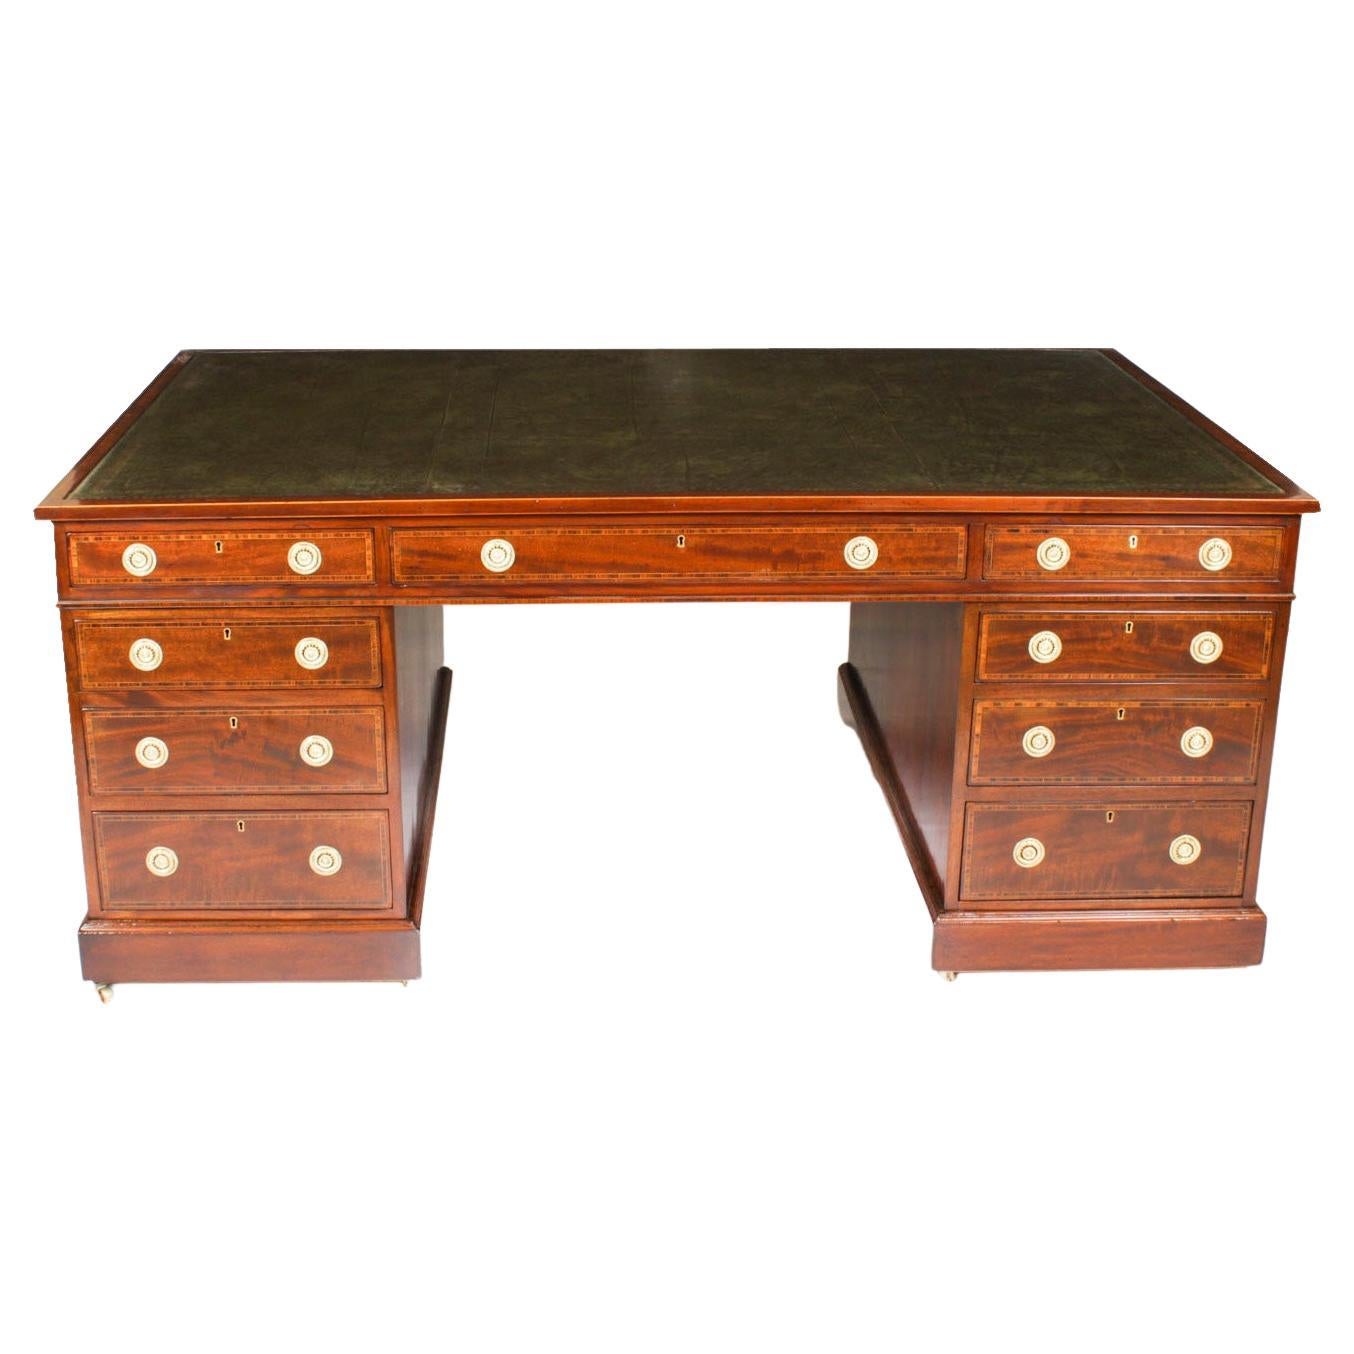 Antique 6ft George III Mahogany Crossbanded Partners Pedestal Desk 19th Century For Sale